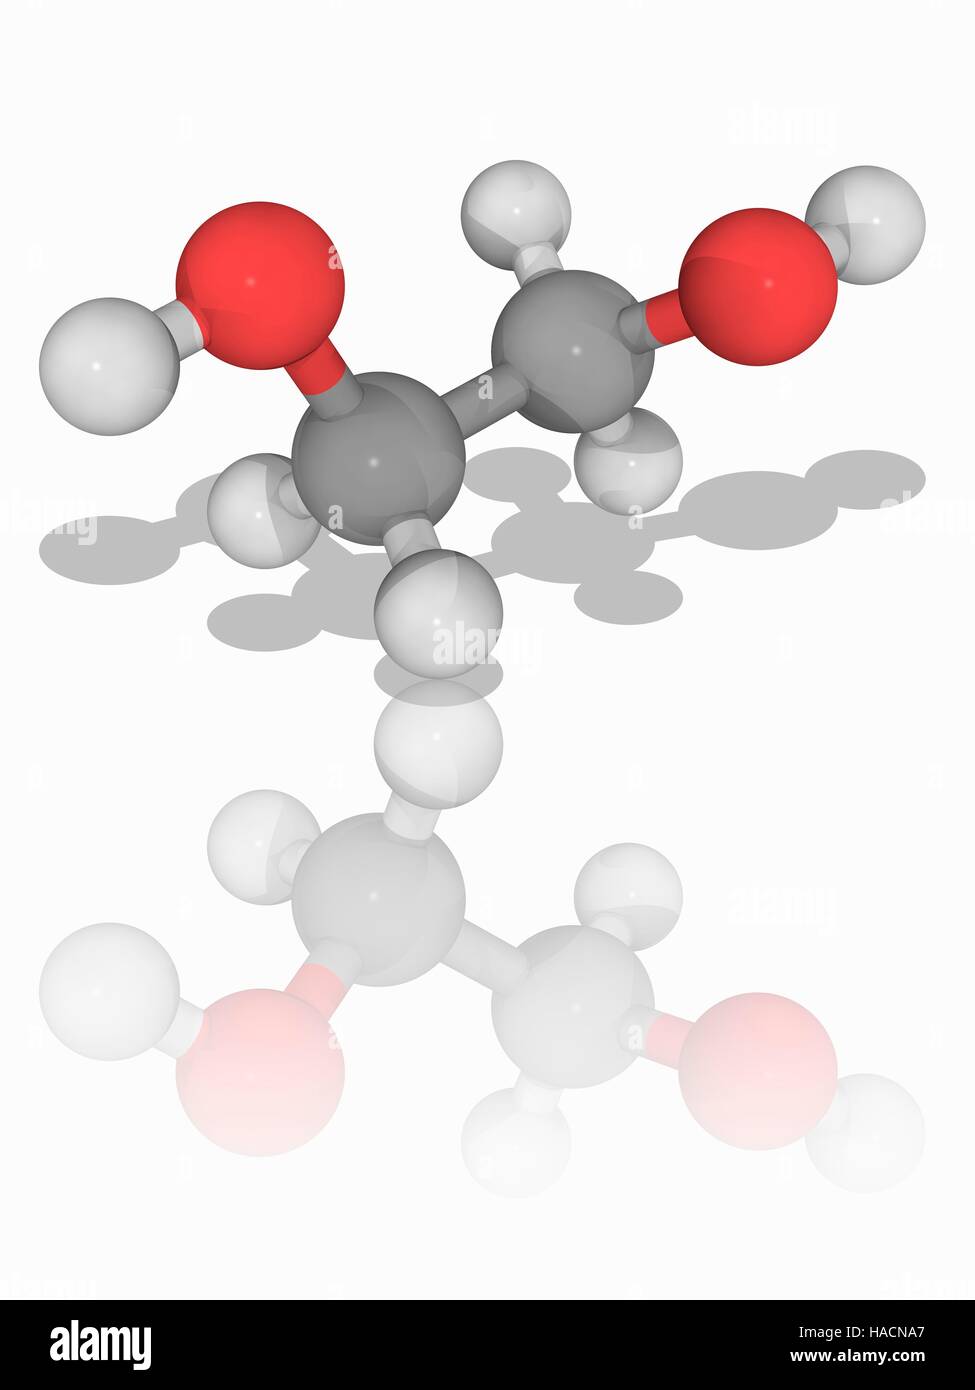 Ethylene glycol. Molecular model of the alkanediol ethylene glycol (C2.H6.O2), an organic compound used as an automotive antifreeze. It is also used in the chemical industry as a precursor to polymers. Atoms are represented as spheres and are colour-coded: carbon (grey), hydrogen (white) and oxygen (red). Illustration. Stock Photo